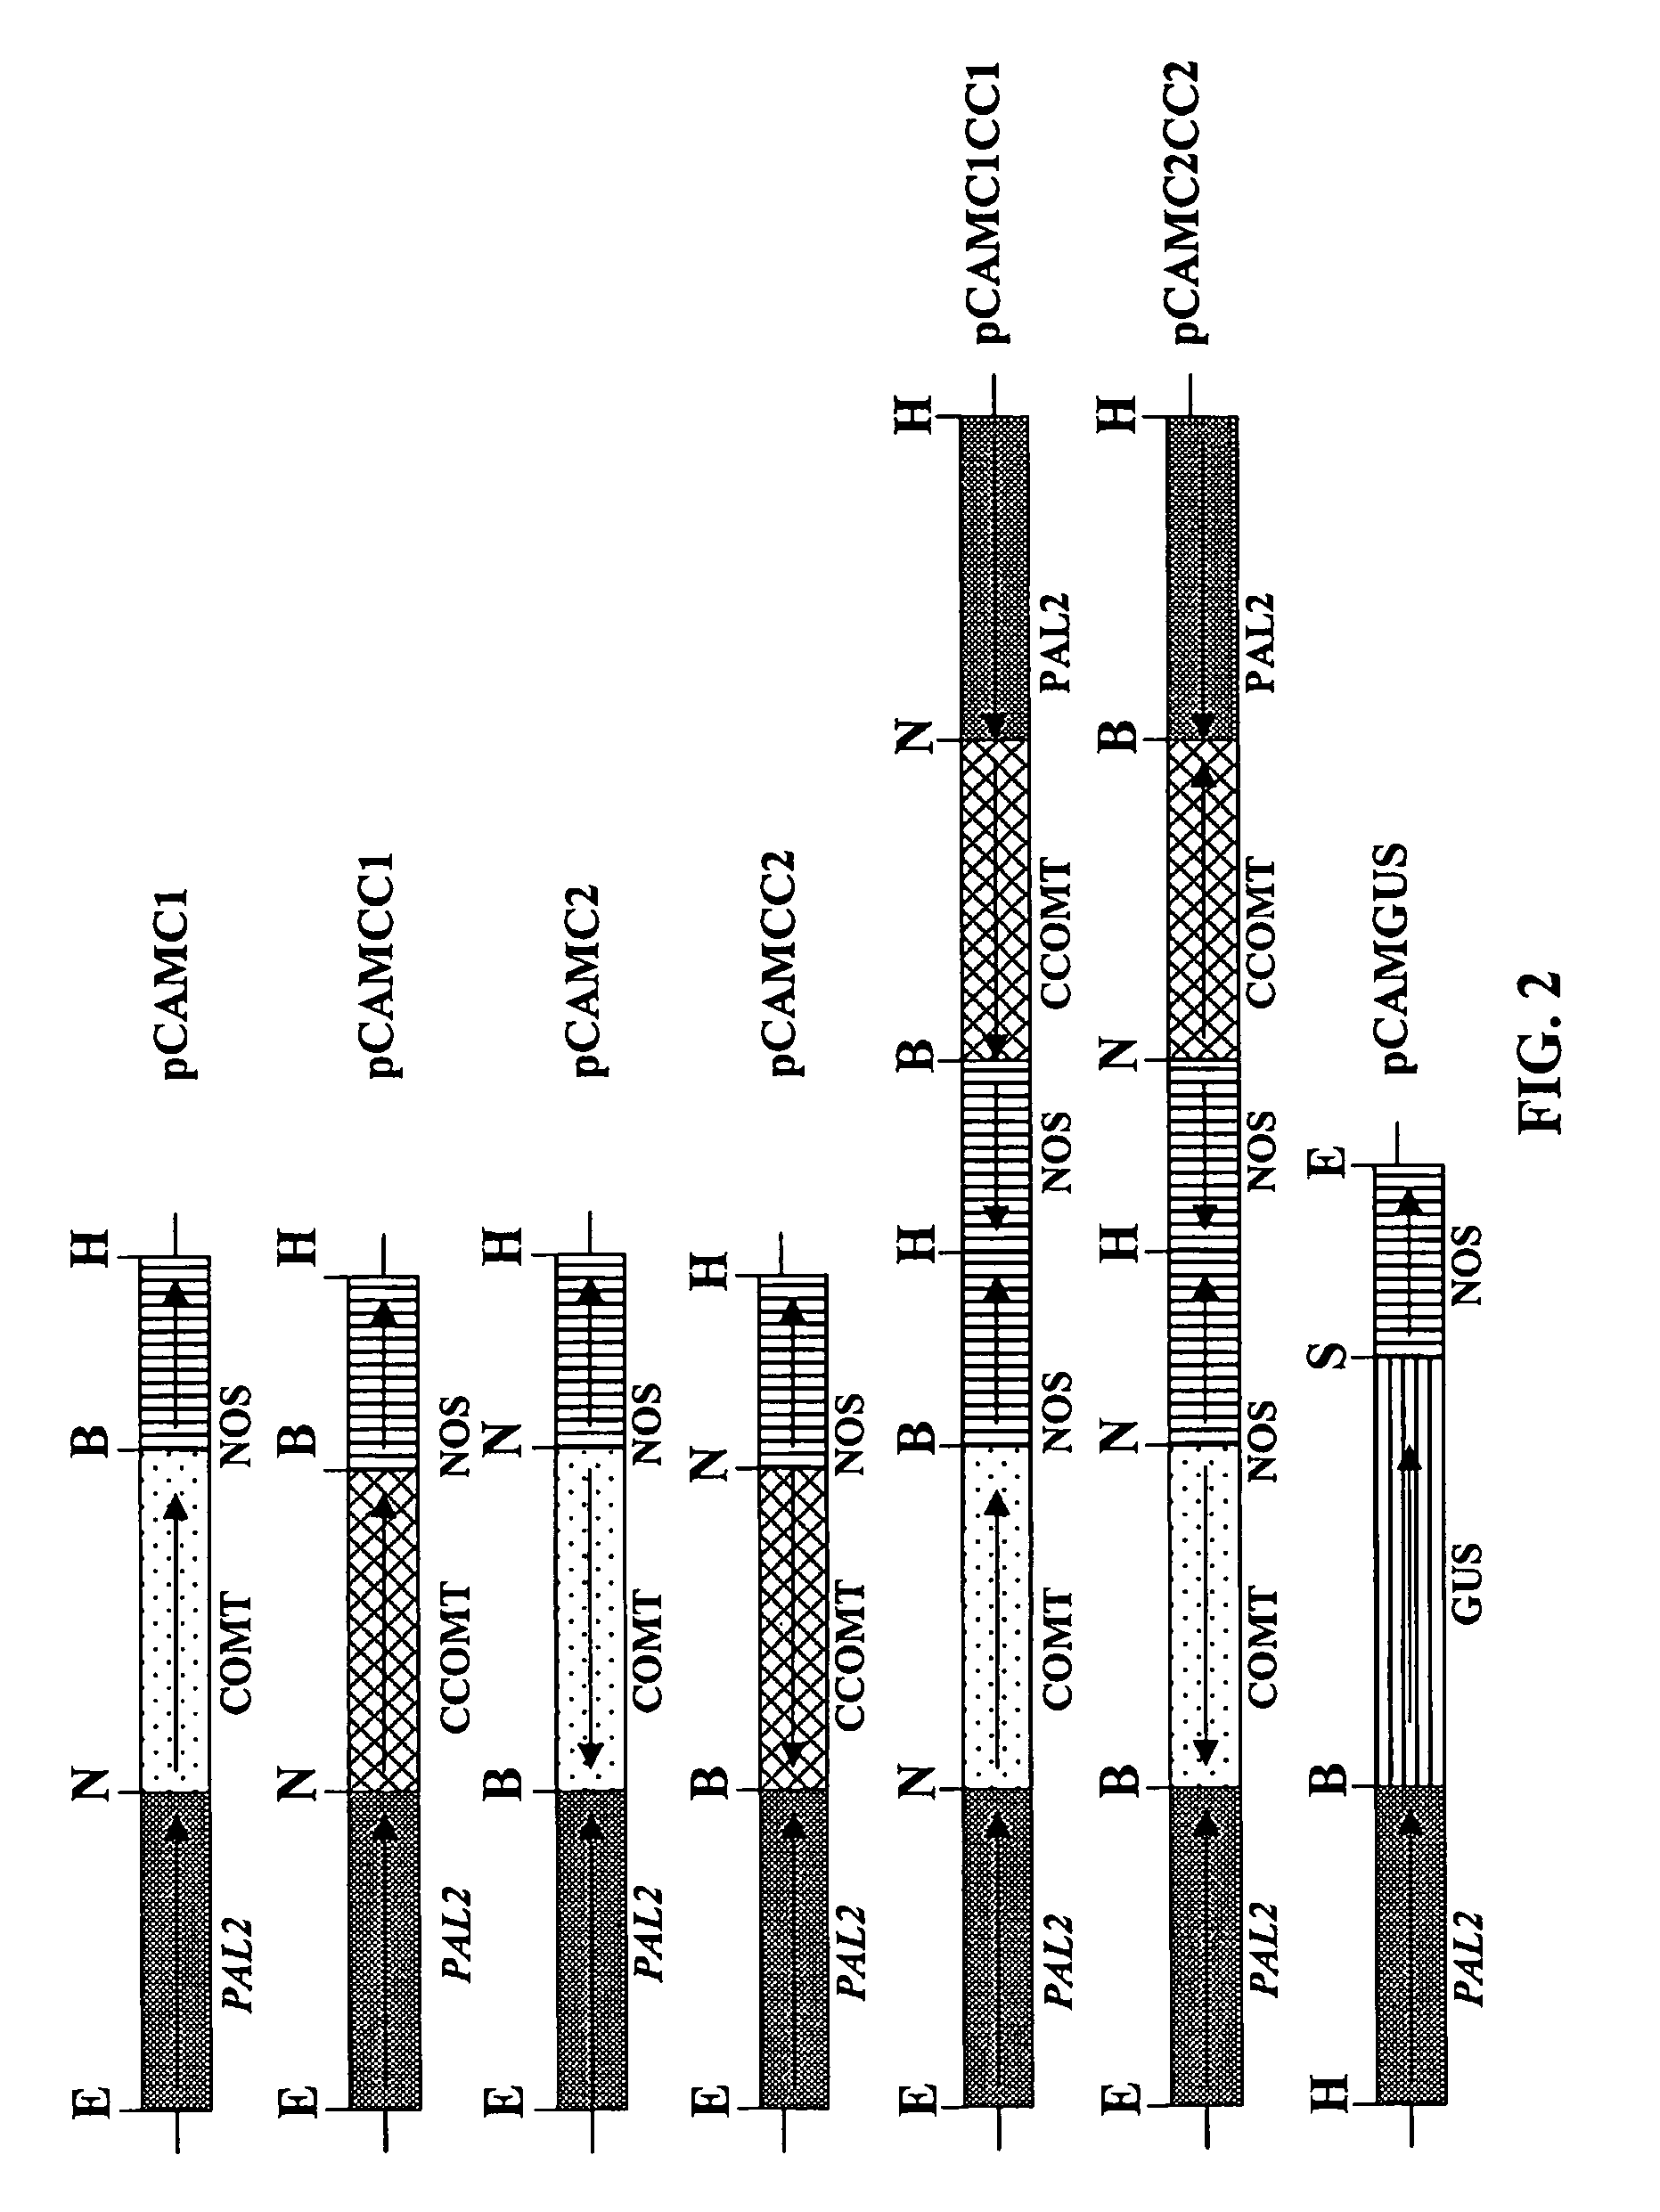 Method for modifying lignin composition and increasing in vivo digestibility of forages